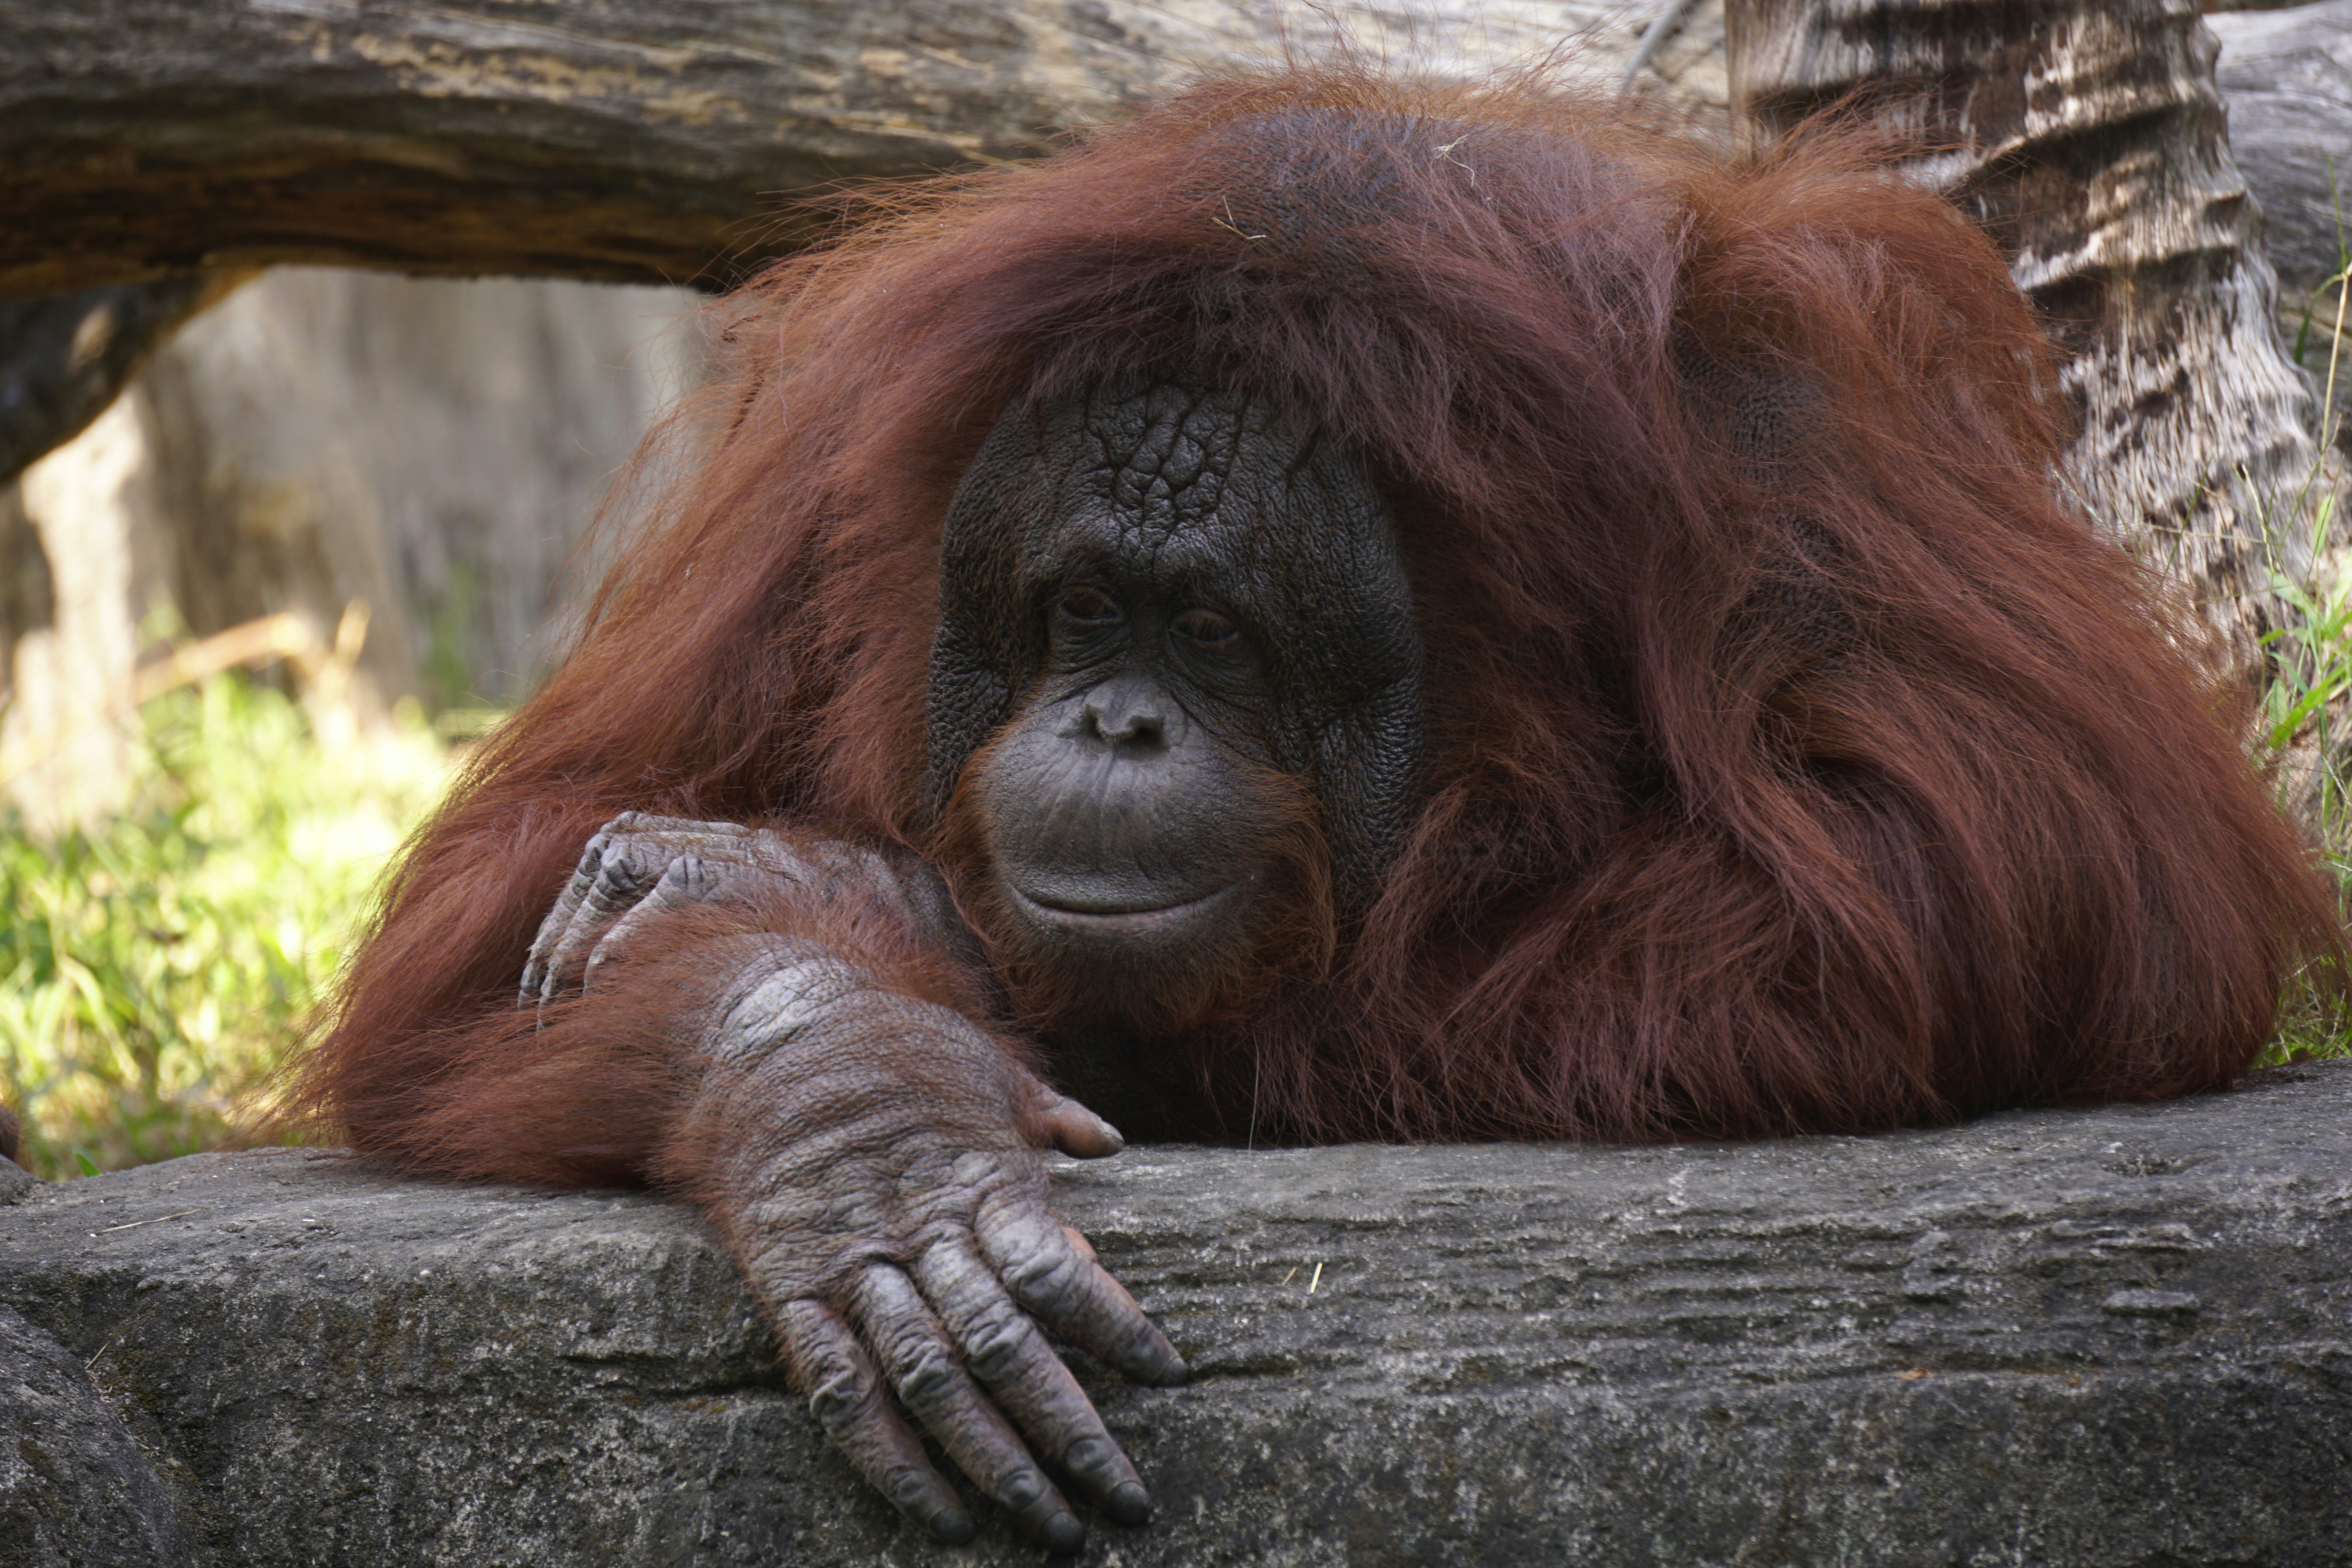 Orangutan, one of the protected rare animals, native animal from Indonesia, and he is a very special animal